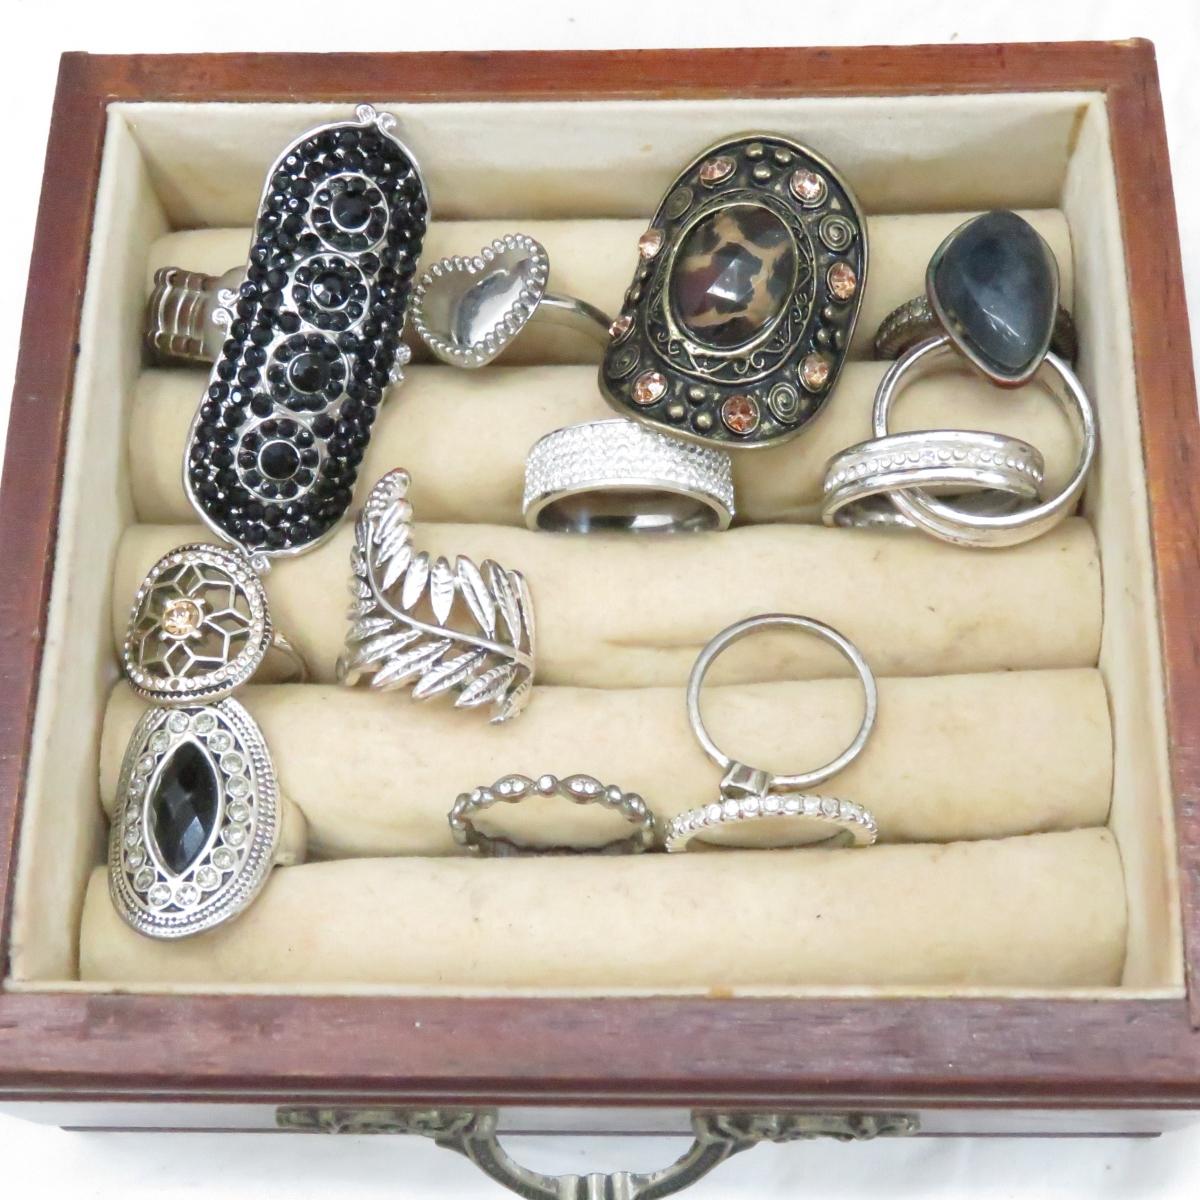 2 Wood Jewelry Boxes full of jewelry & More